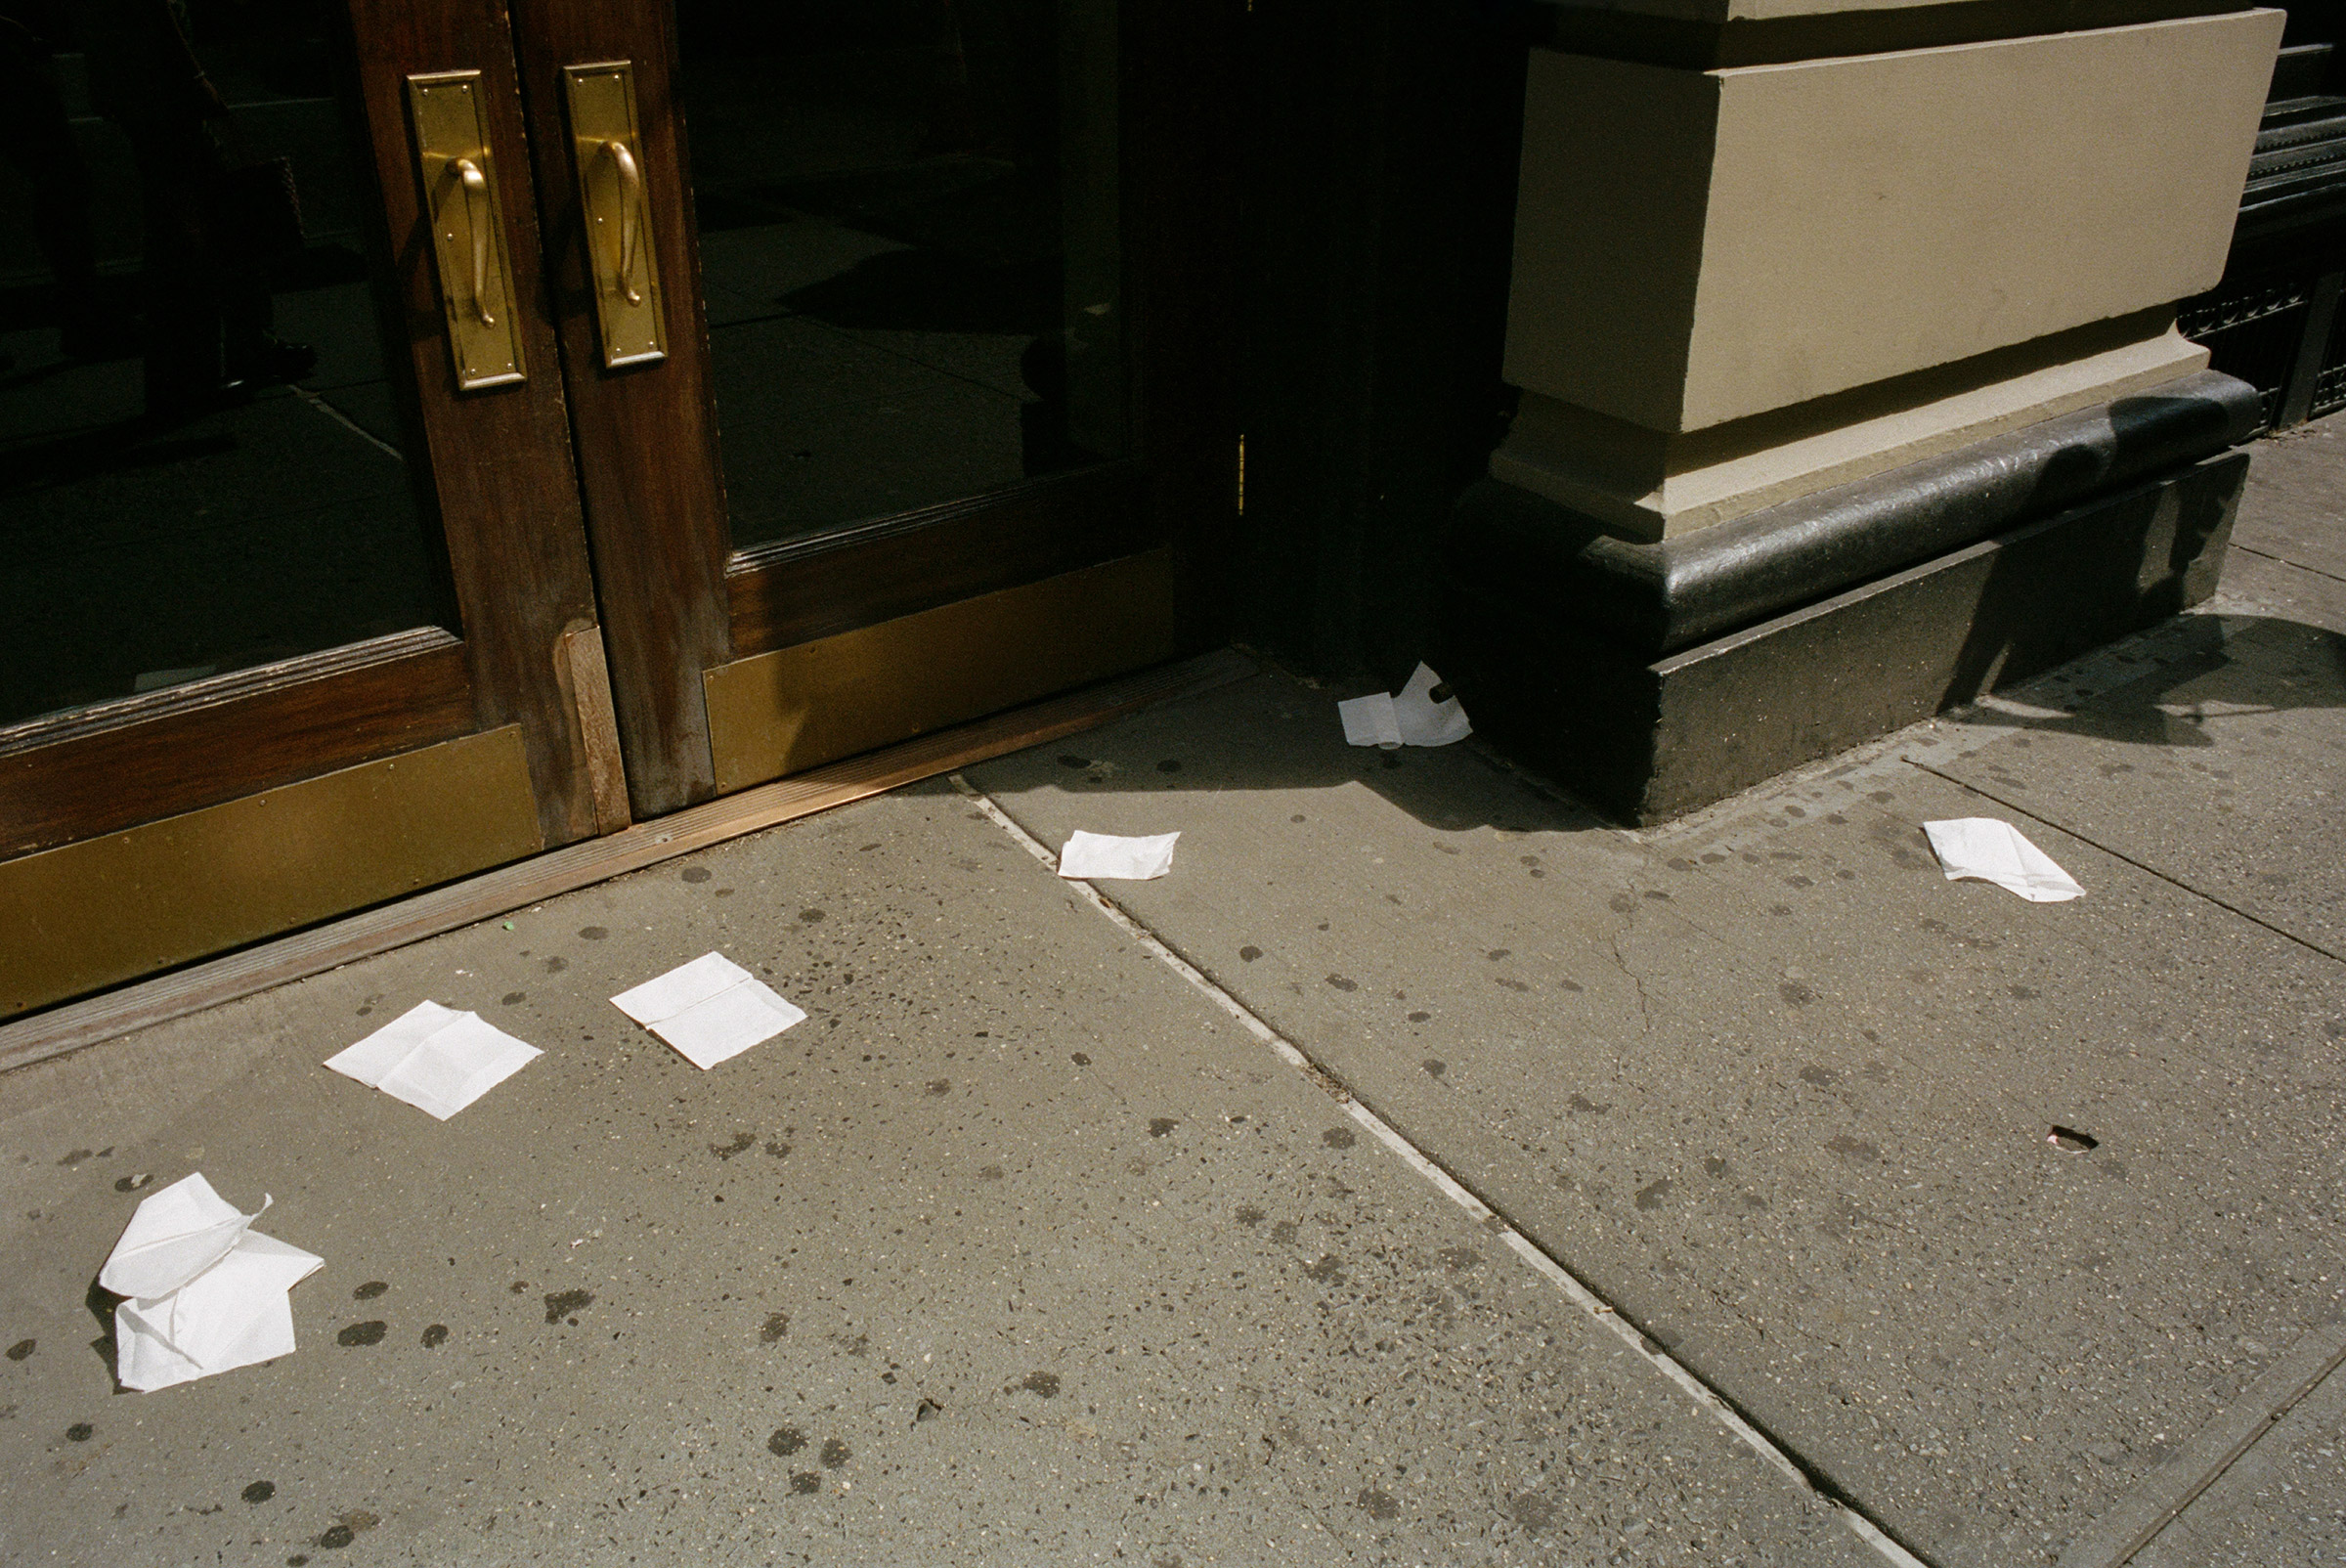 A trail of napkins on Broadway in SoHo, Aug. 6, 2021. (Daniel Arnold)